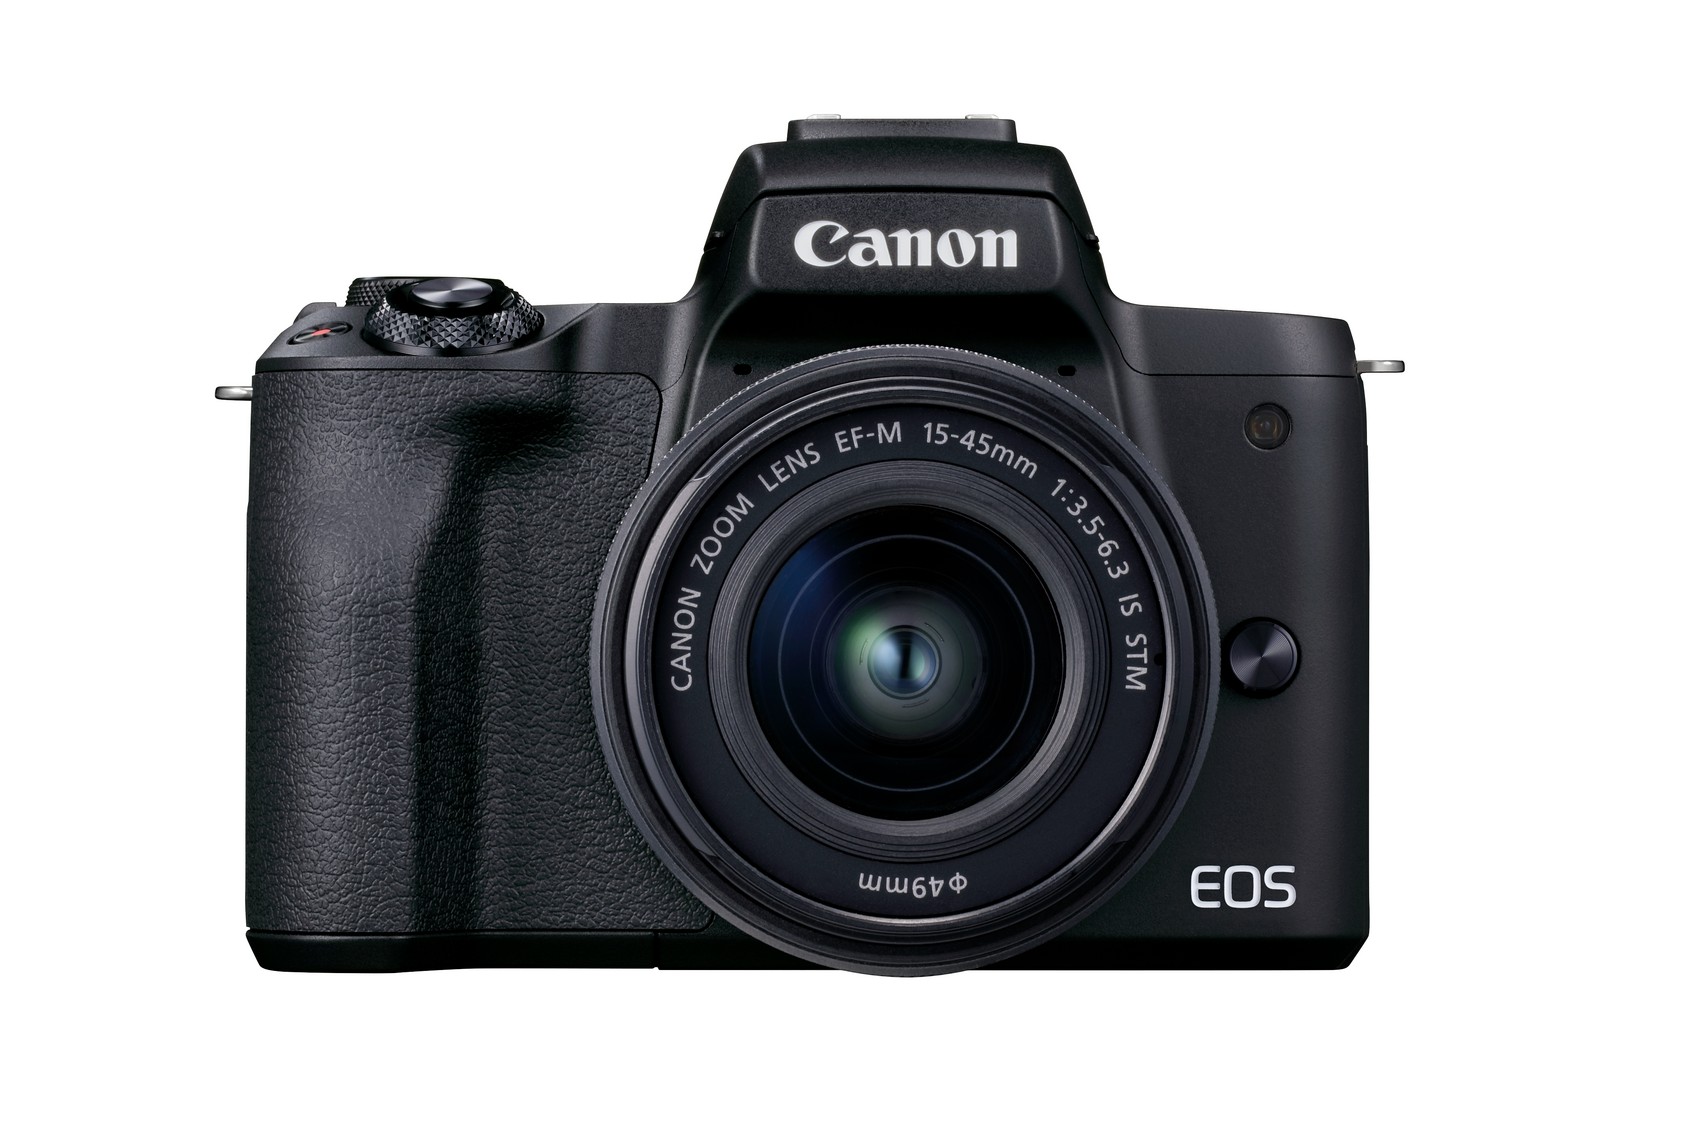 Canon EOS M50 Mark II Kit EF-M 18-150mm f/3.5-6.3 IS STM